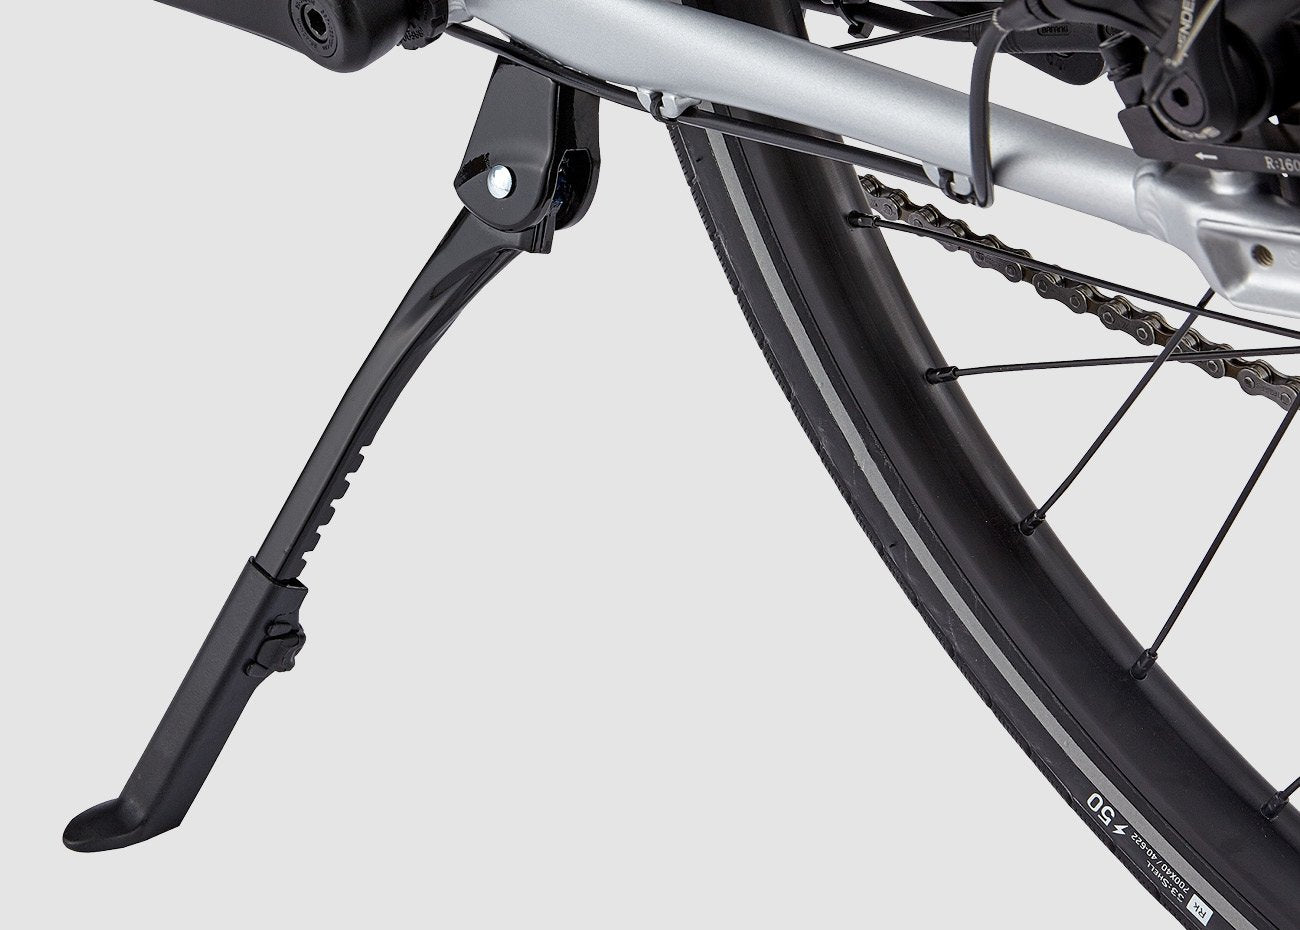 Charge City electric bike quick start guide